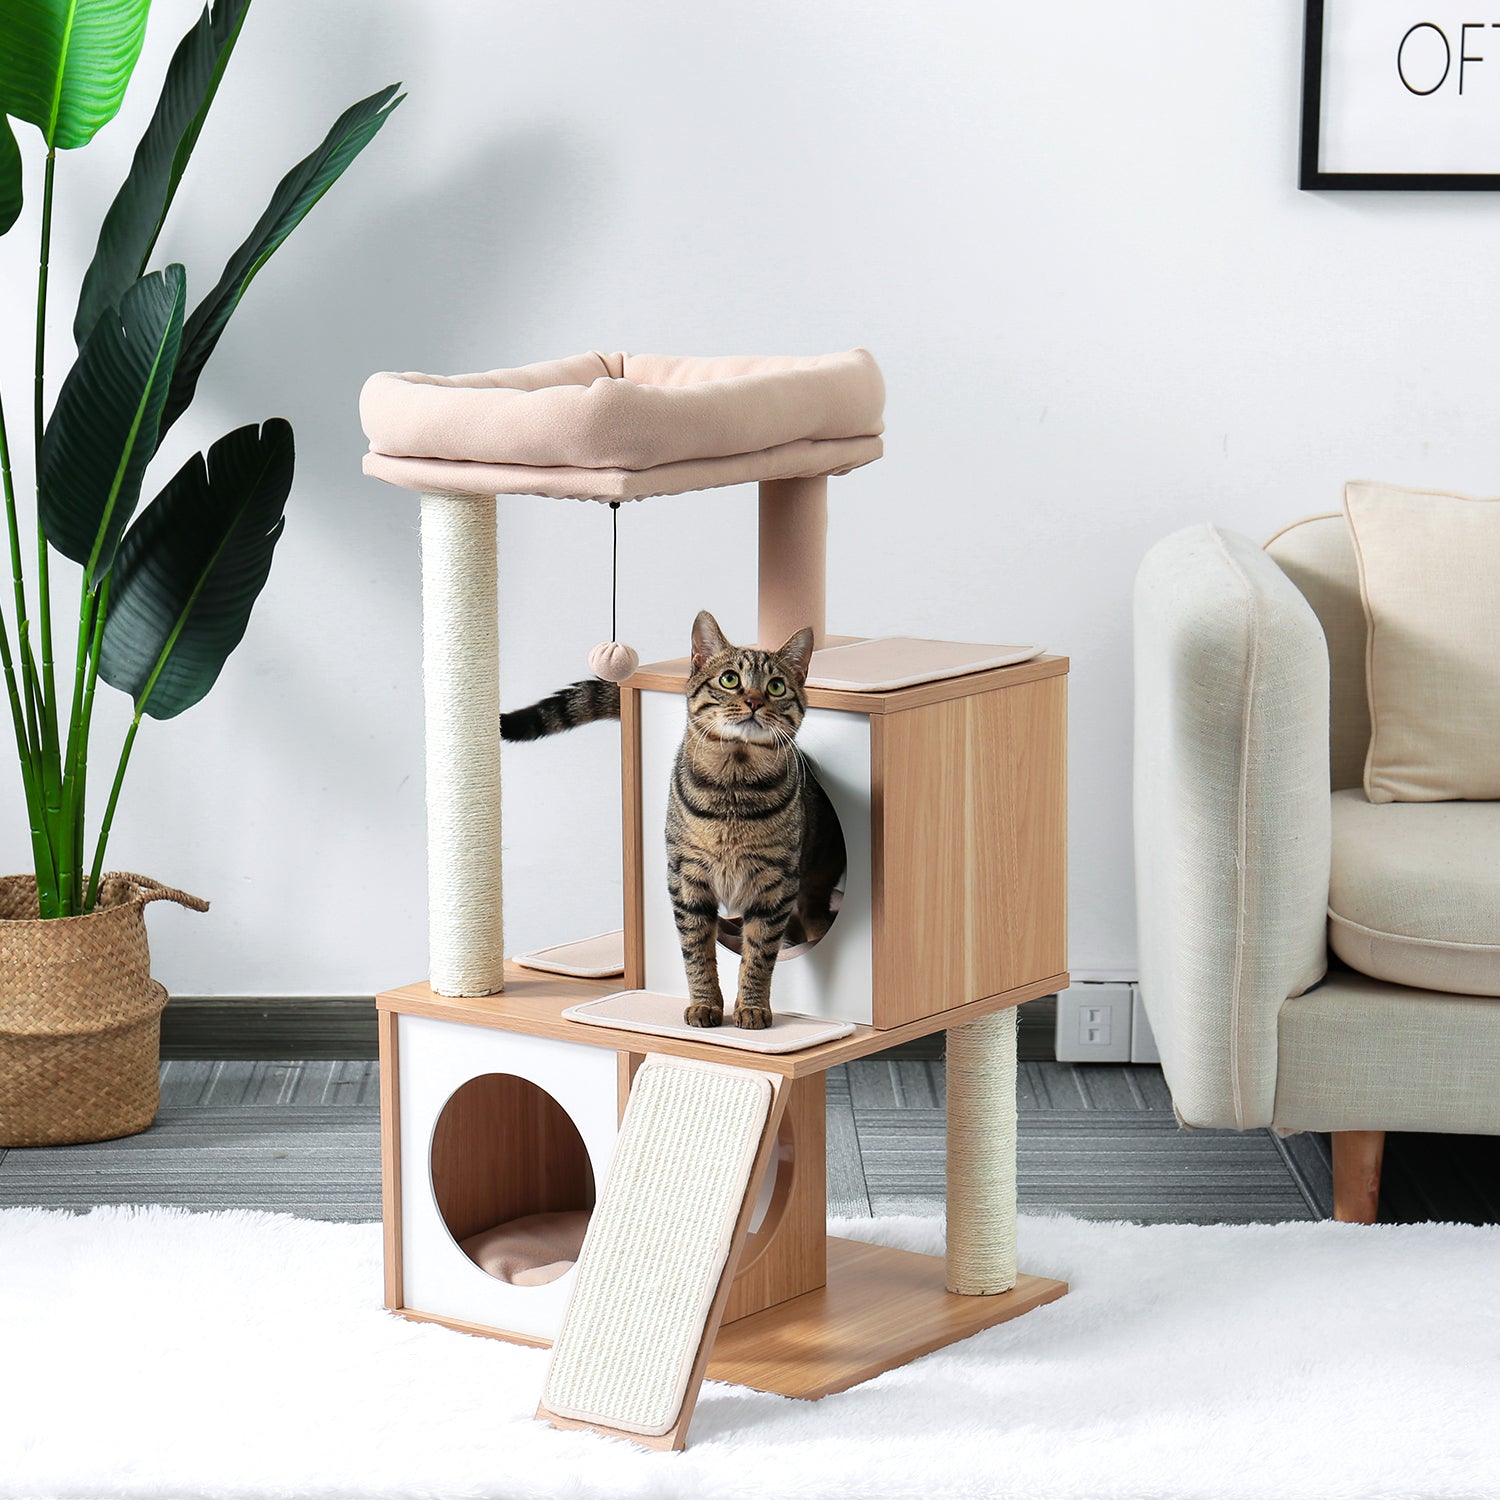 Modern Wood Cat Tree Cat Tower With Double Condos Spacious Perch Sisal Scratching Posts and Replaceable Dangling Balls - TOYSHIP